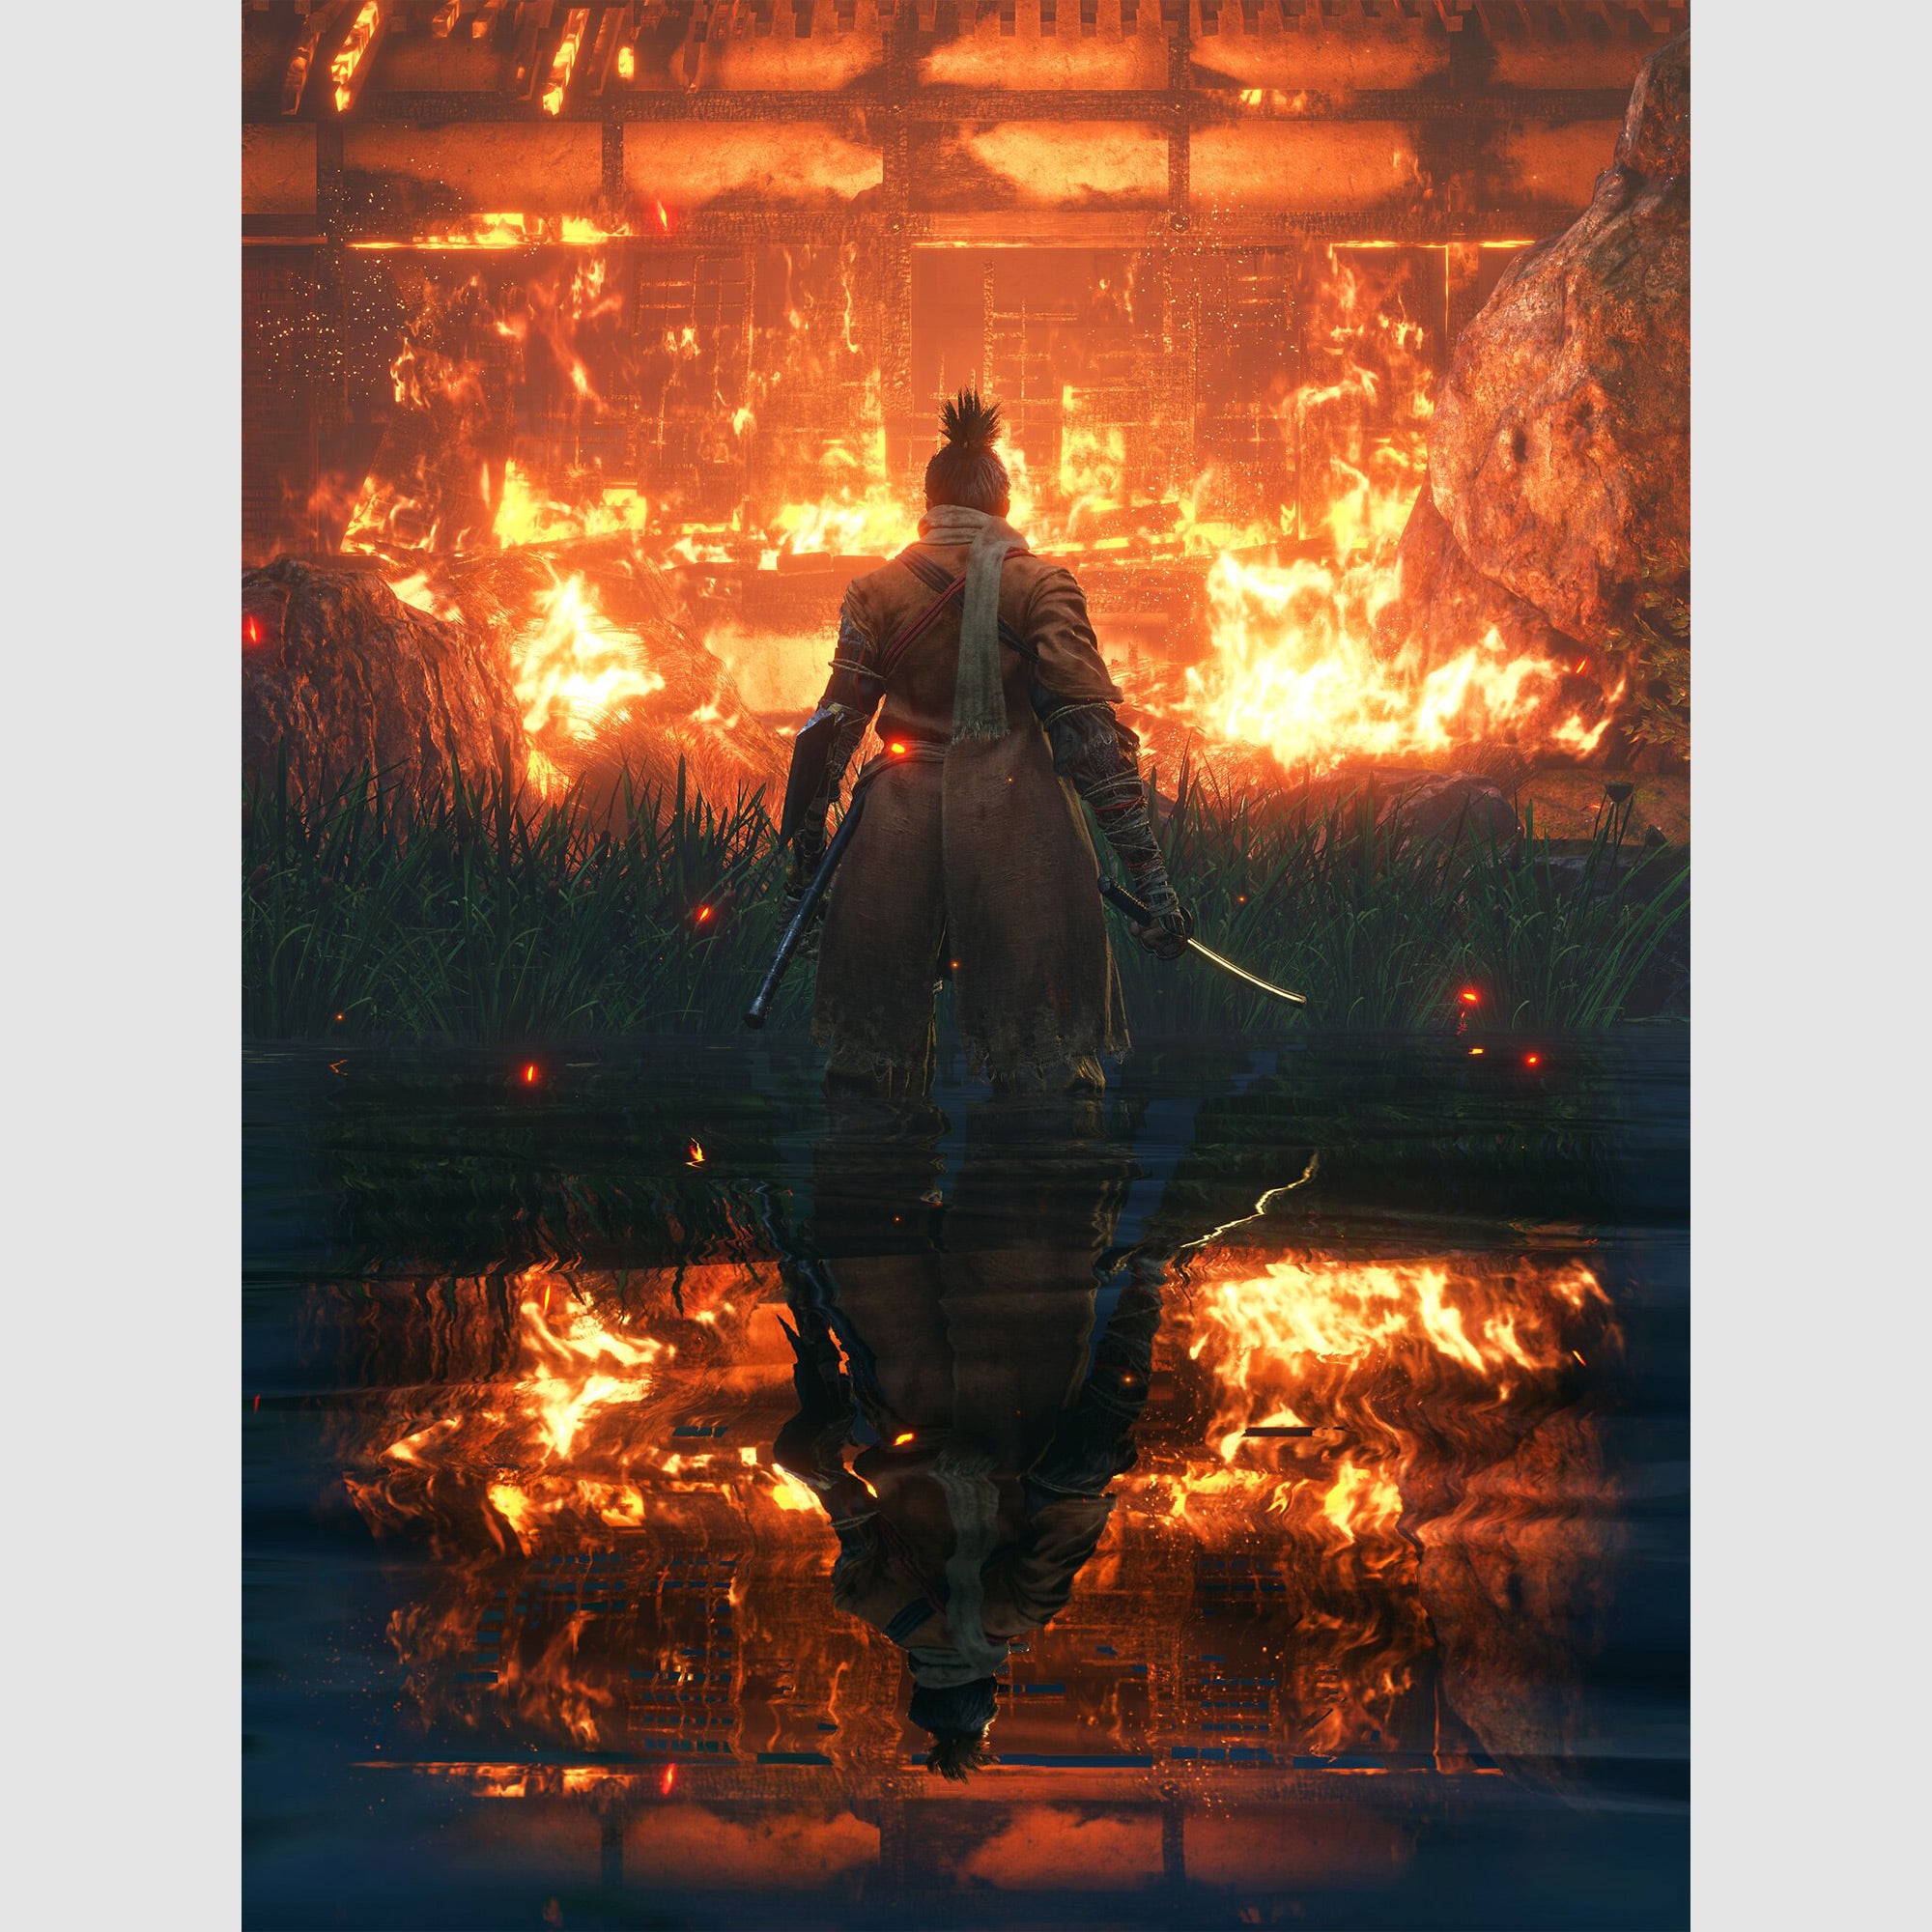 “Man On Fire” – Sekiro: Shadows Die Twice shot by Andy Cull